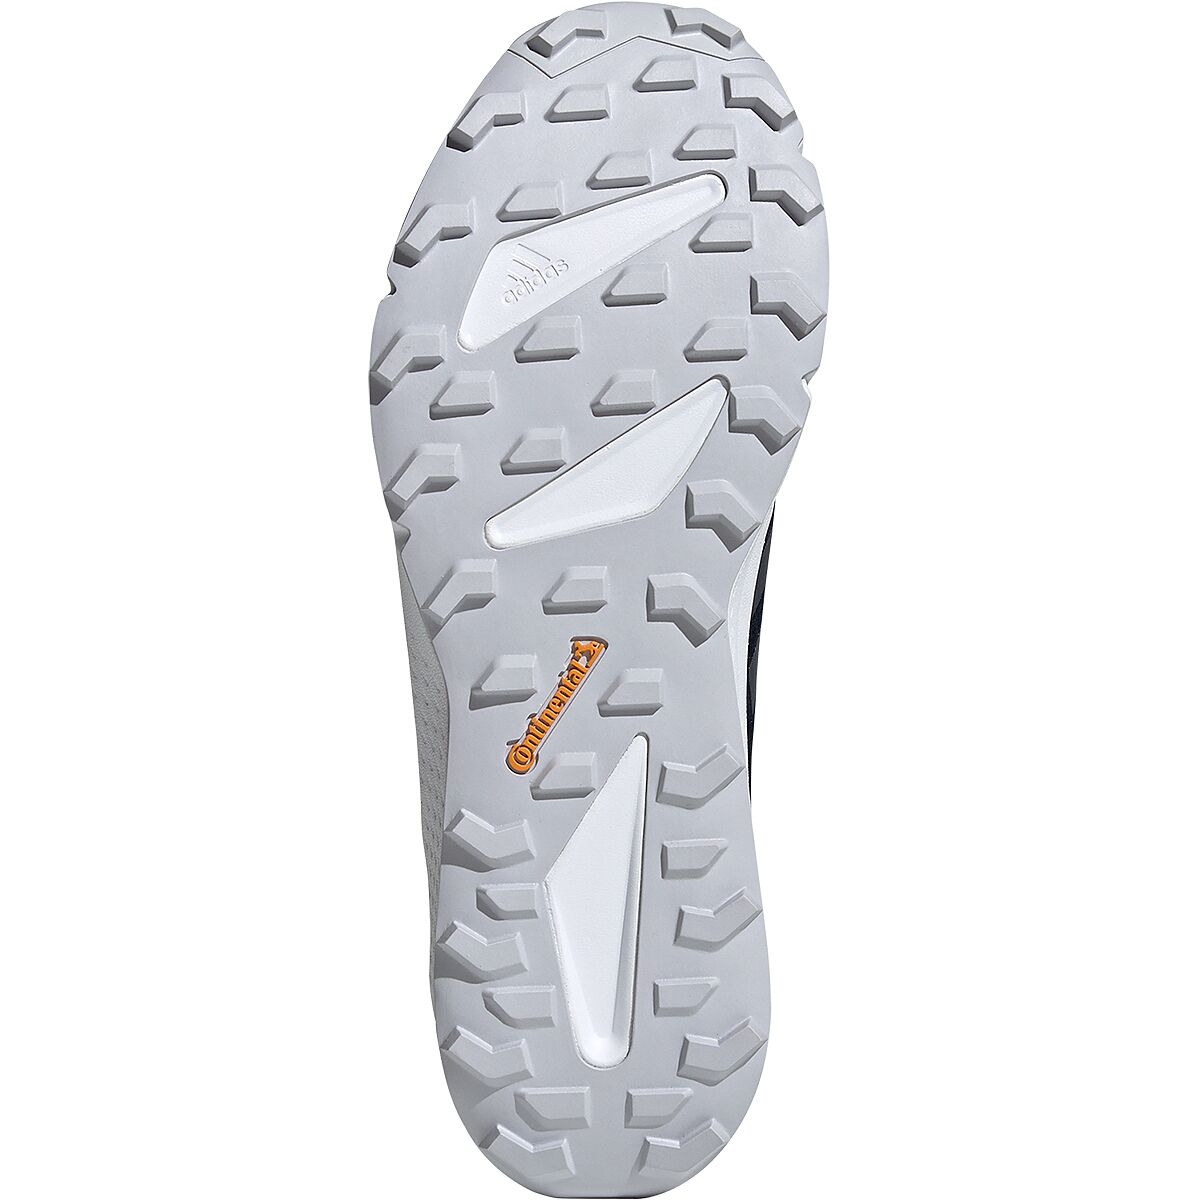 terrex speed ld trail running shoes review